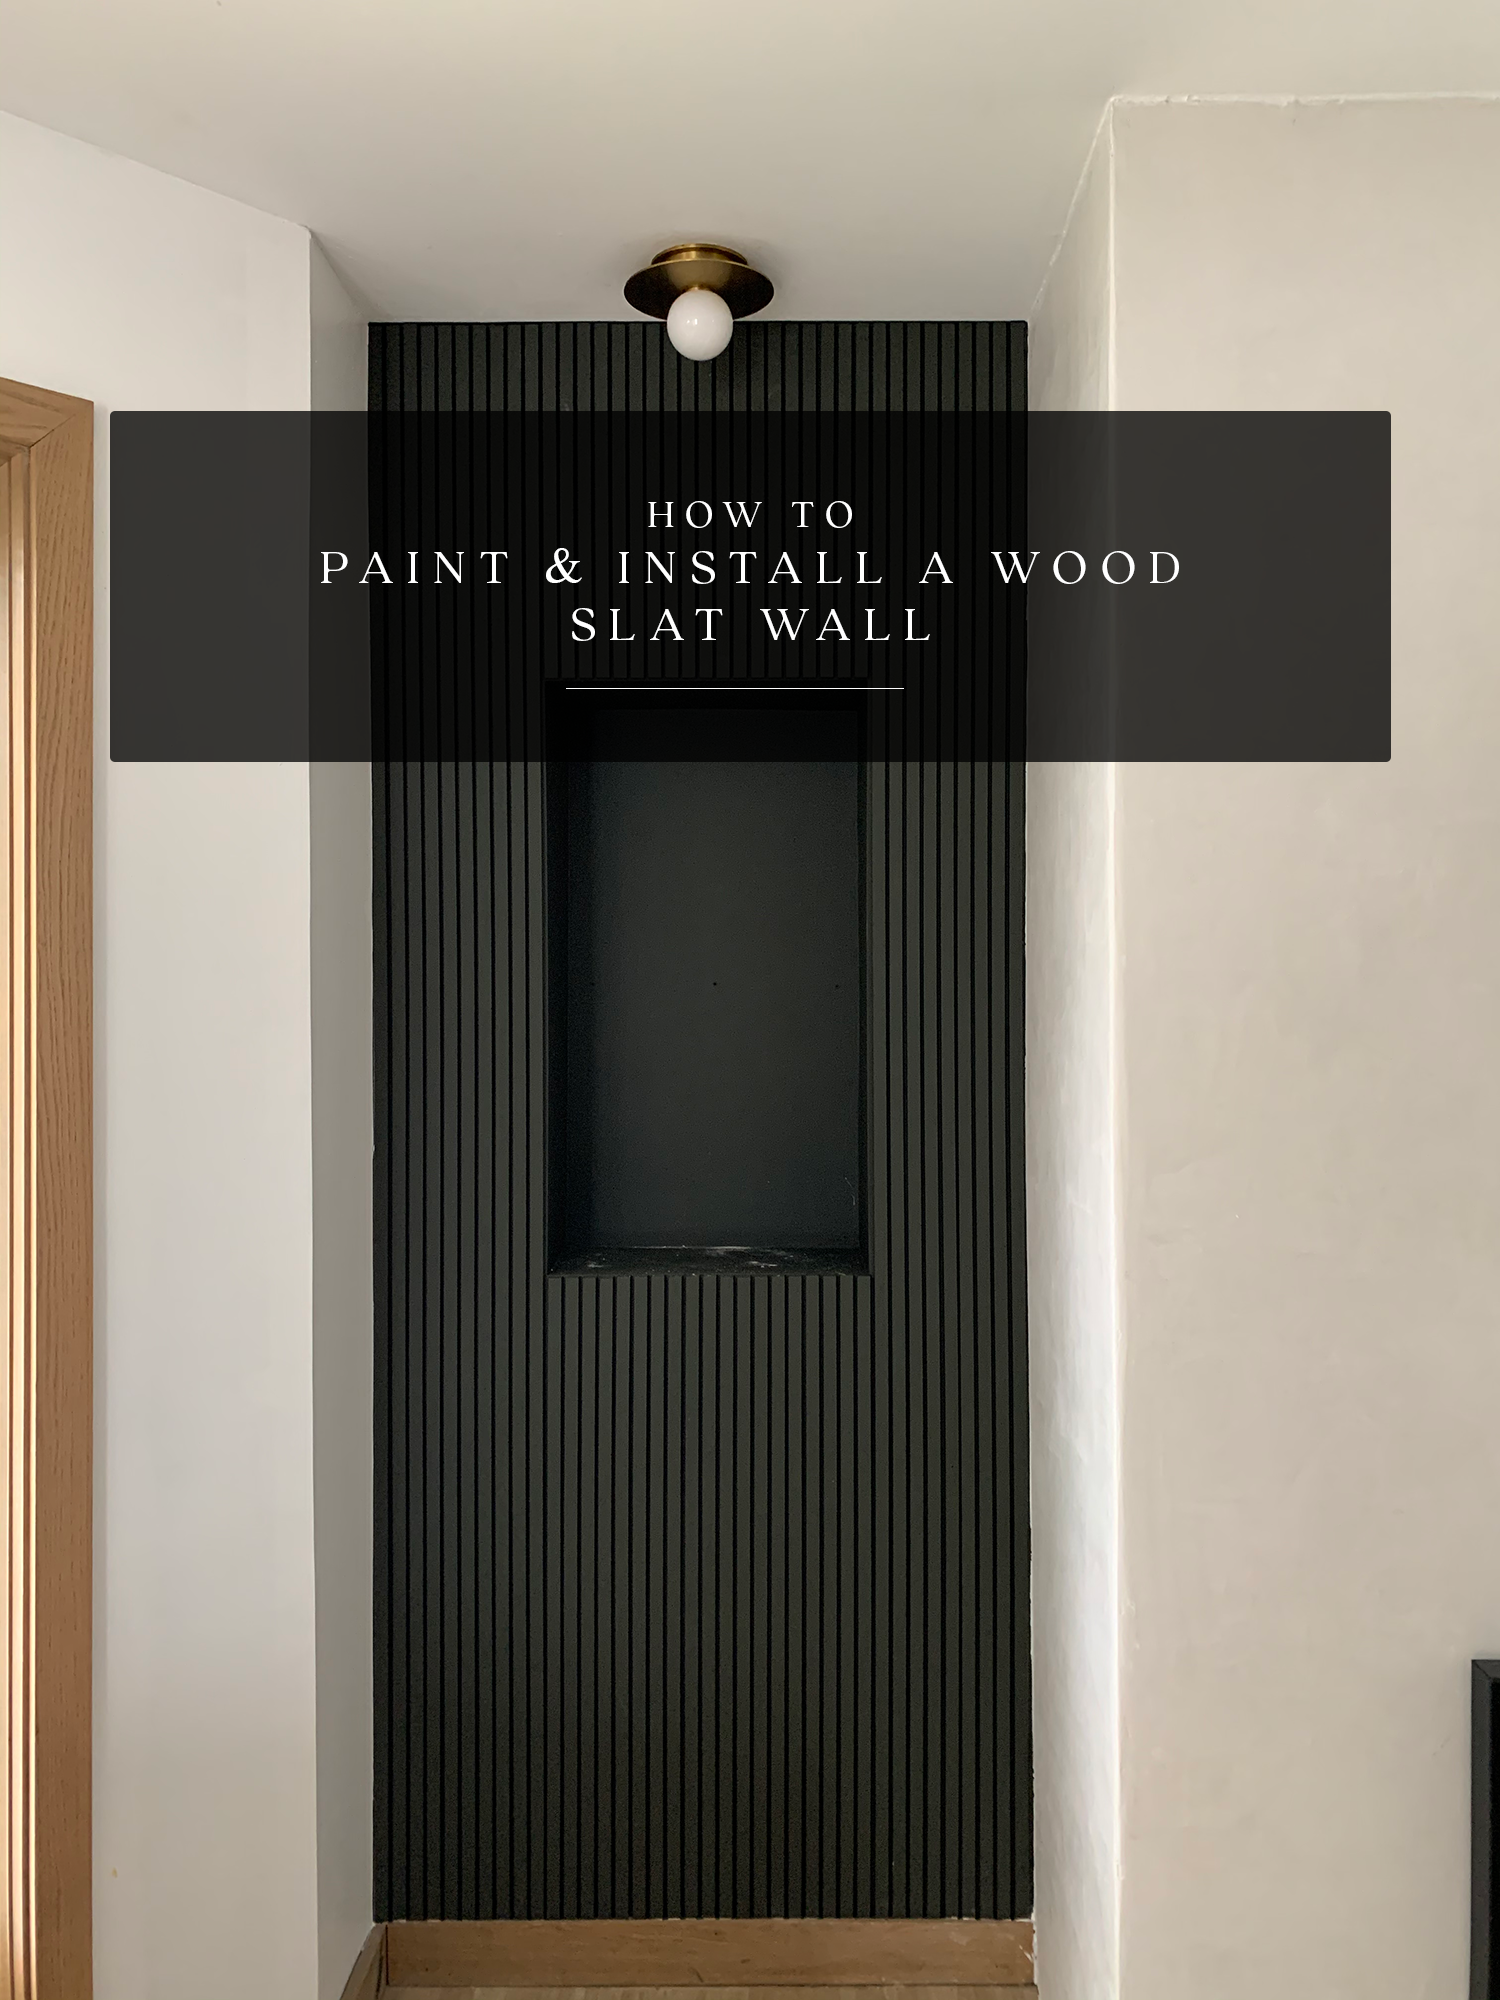 How to Paint and Install a Wood Slat Wall - BREPURPOSED